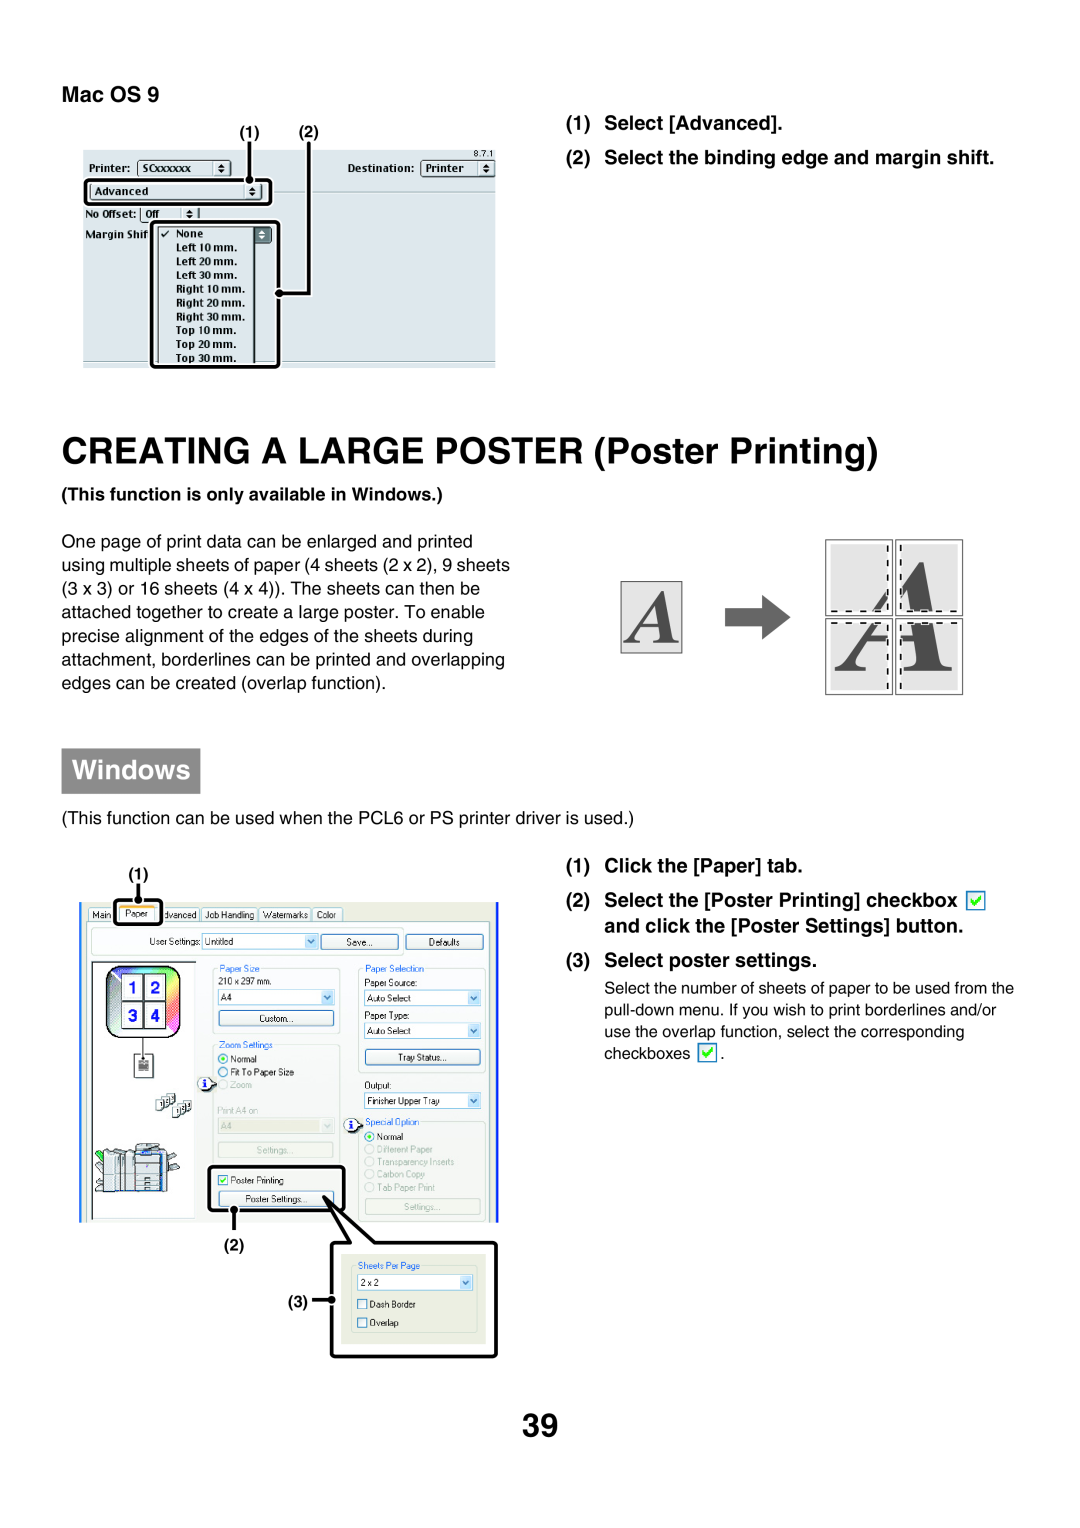 Sharp MX-6200N manual CREATING A LARGE POSTER Poster Printing, Select Advanced, Click the Paper tab, Select poster settings 